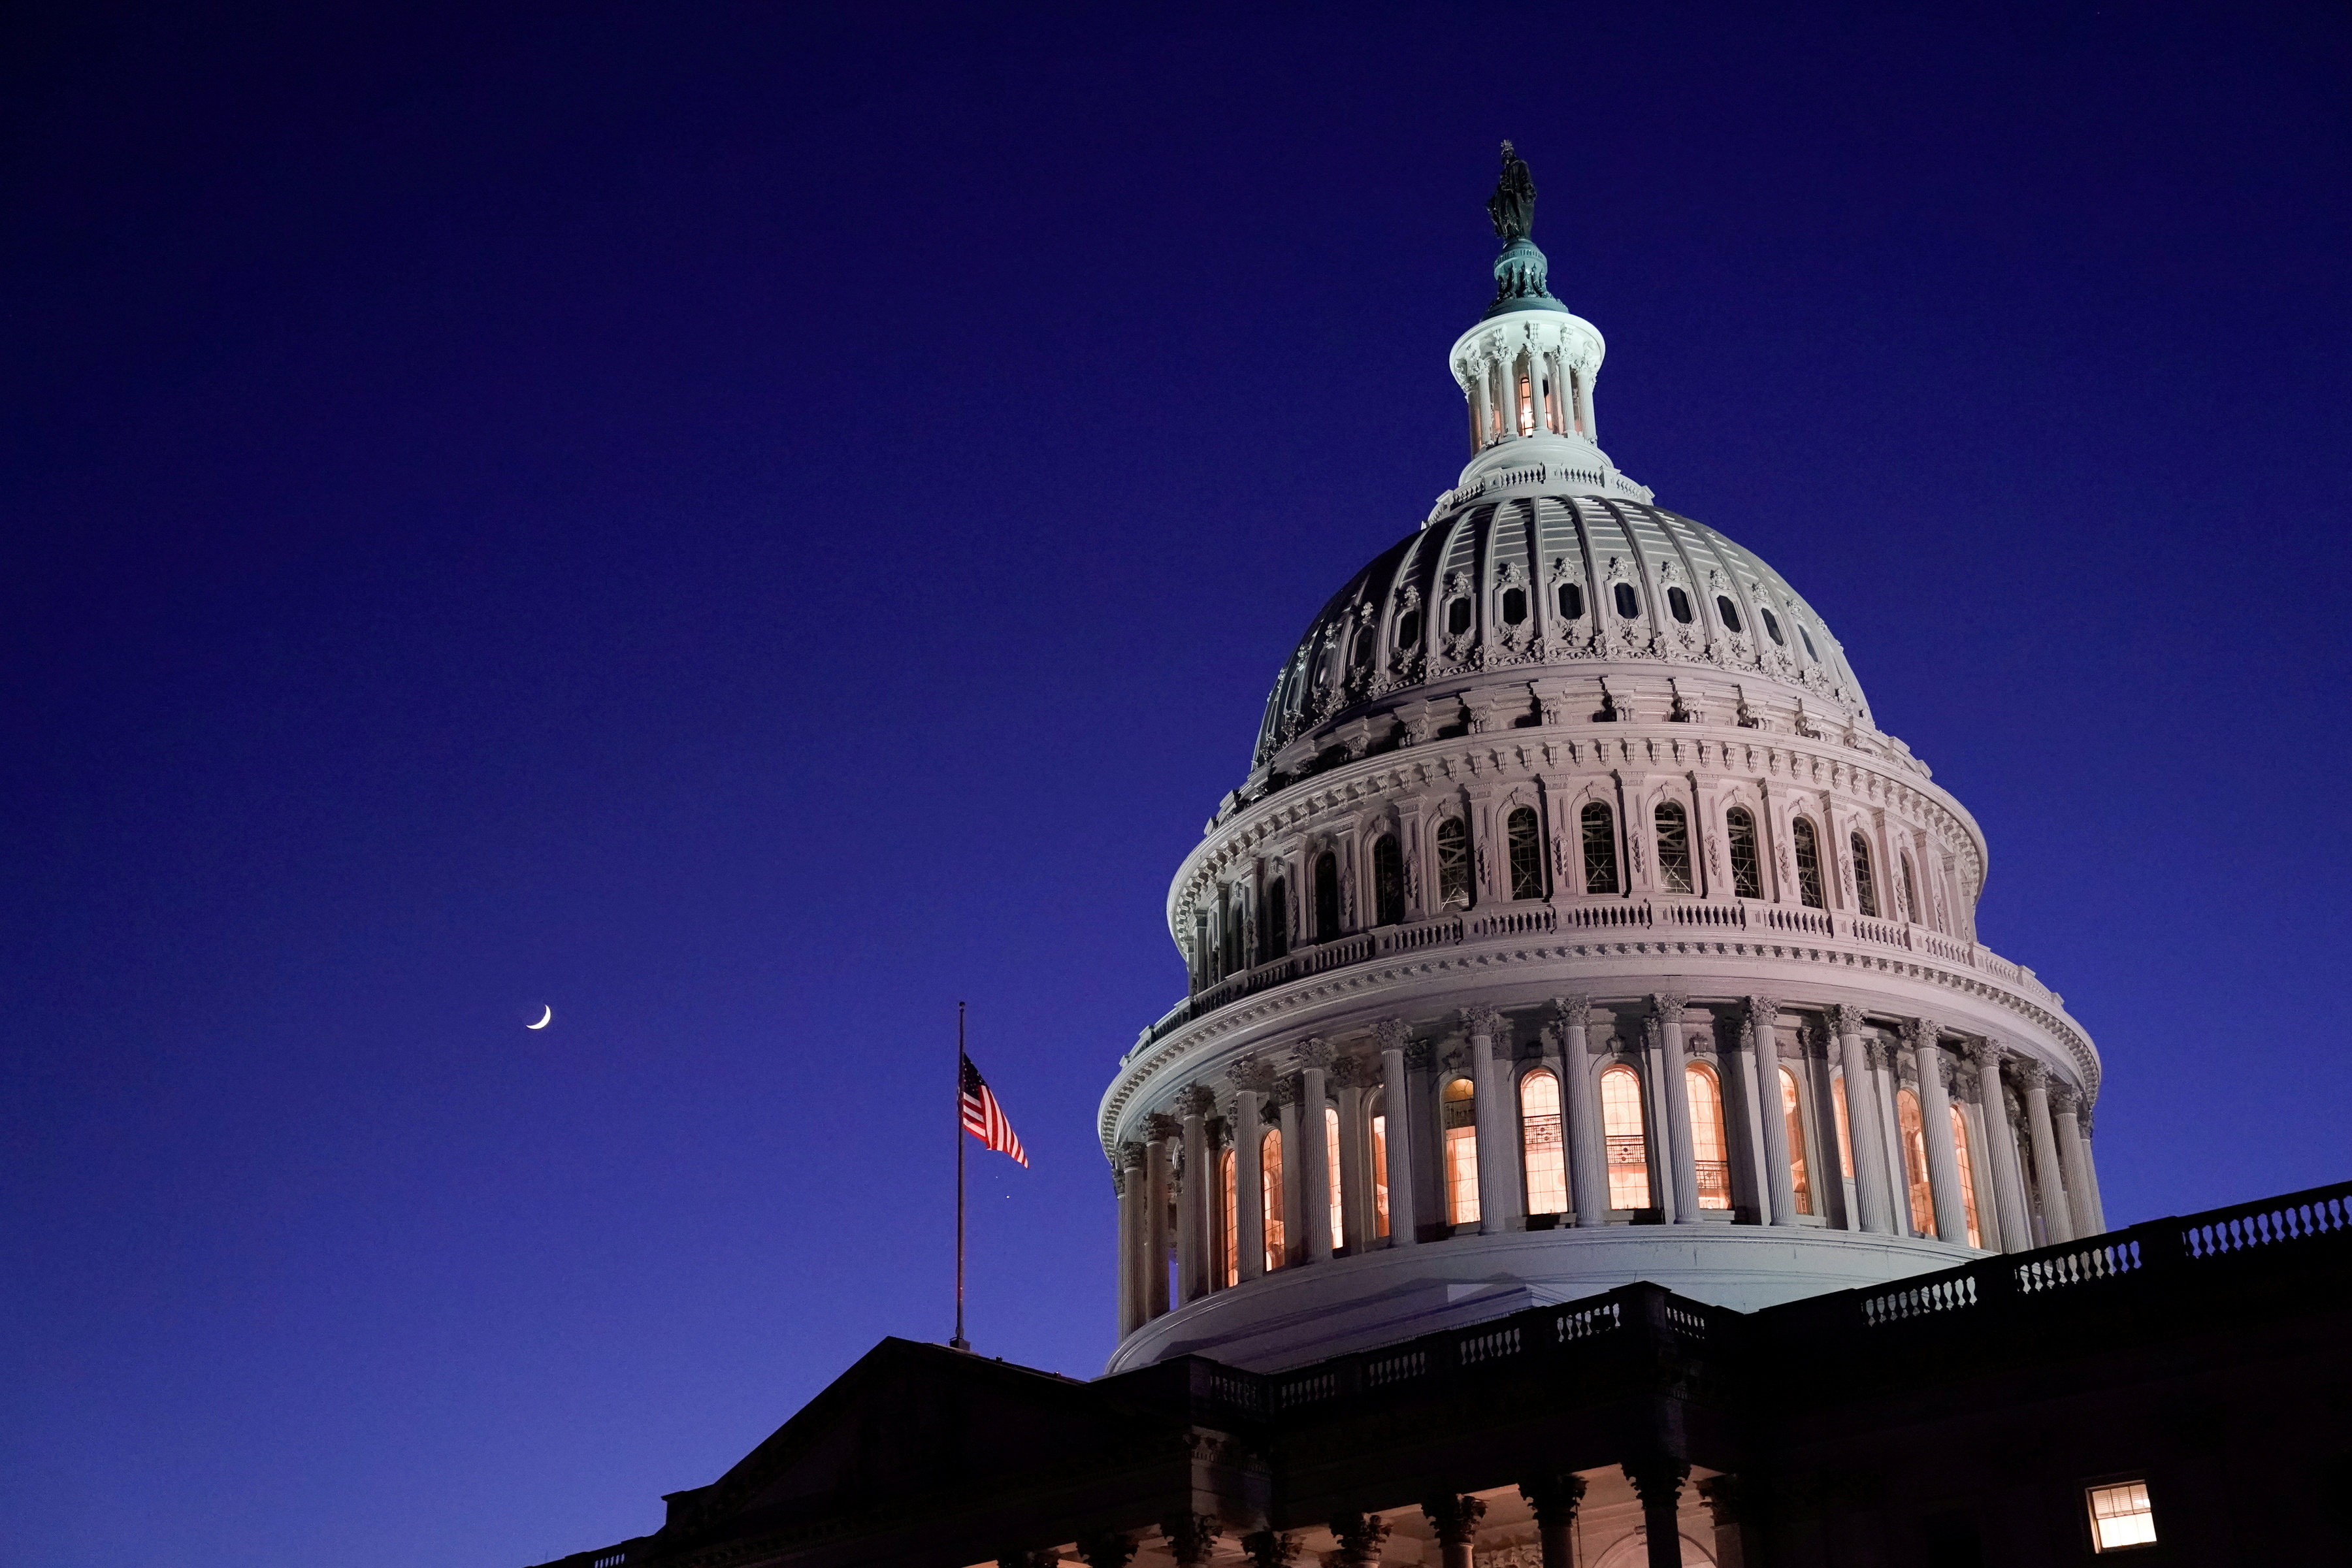 The U.S. Capitol dome is seen at night in Washington